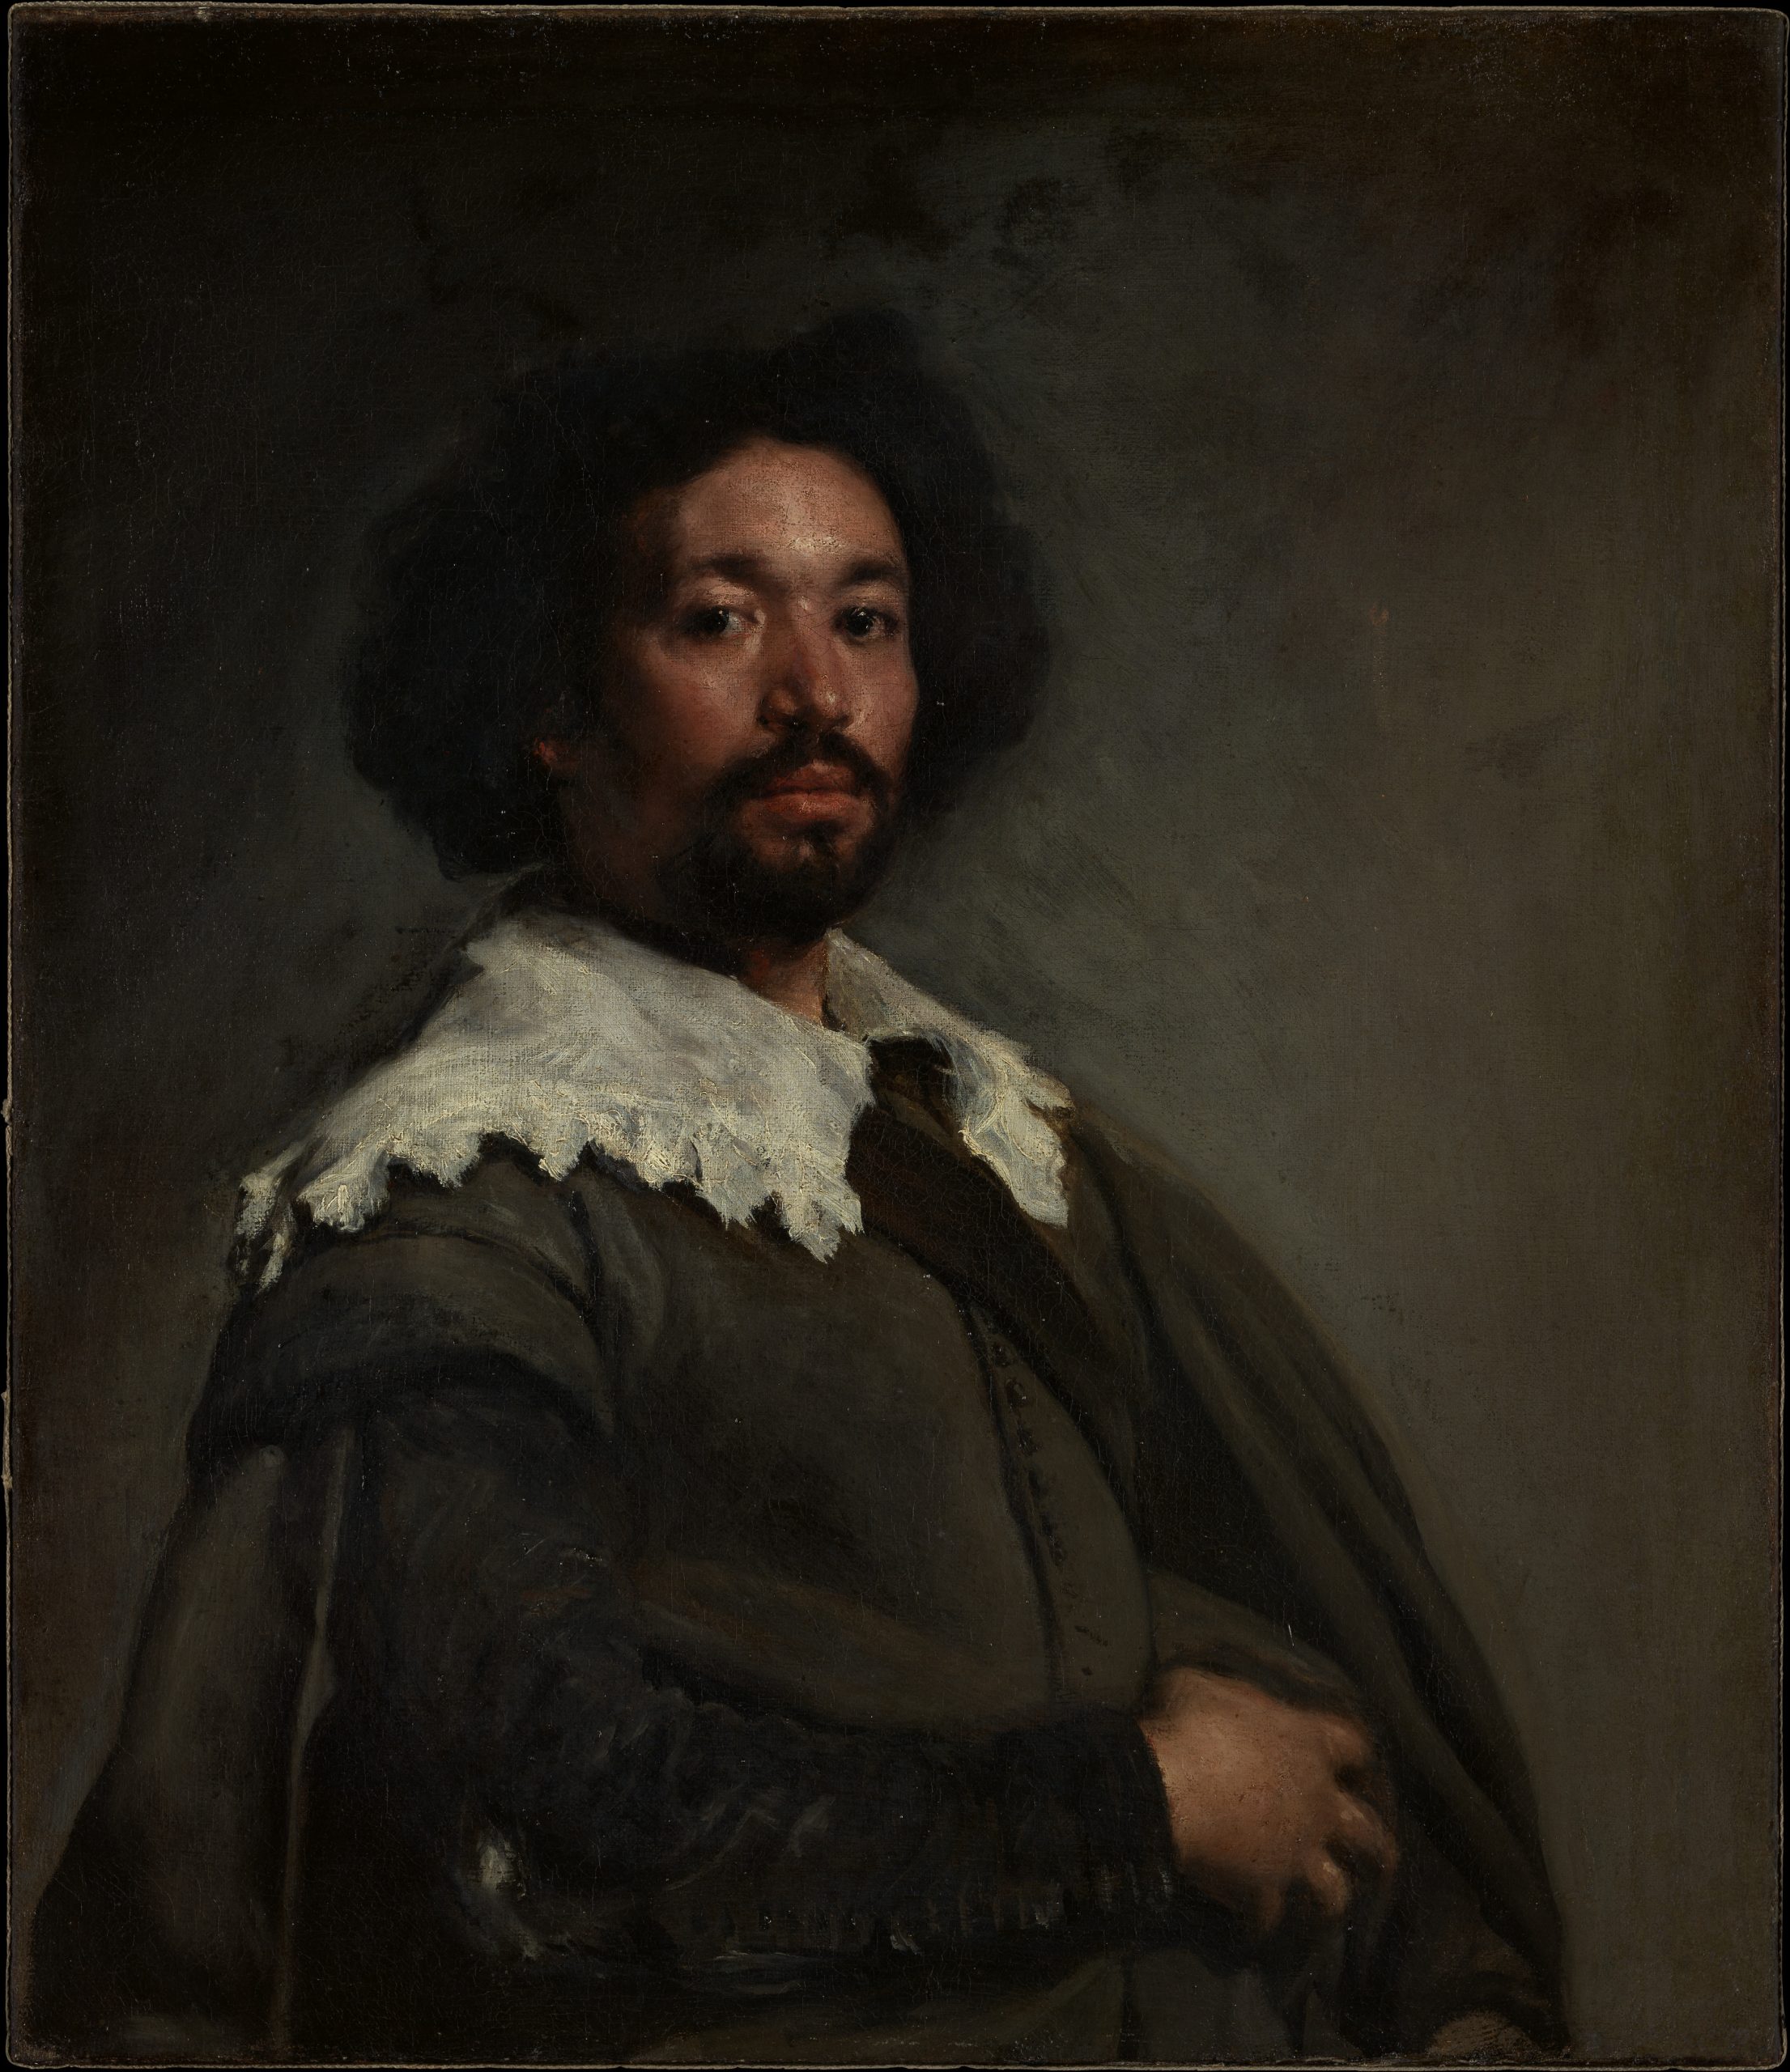 Velázquez (Diego Rodríguez de Silva y Velázquez), Portrait of Juan de Pareja, oil on canvas, Spanish, 1650. (The Metropolitan Museum of Art, purchase: Fletcher and Rogers Funds, and Bequest of Miss Adelaide Milton de Groot, by exchange, supplemented by gifts from friends of the Museum, 1971.). Photo: The Metropolitan Museum of Art, Public Domain.